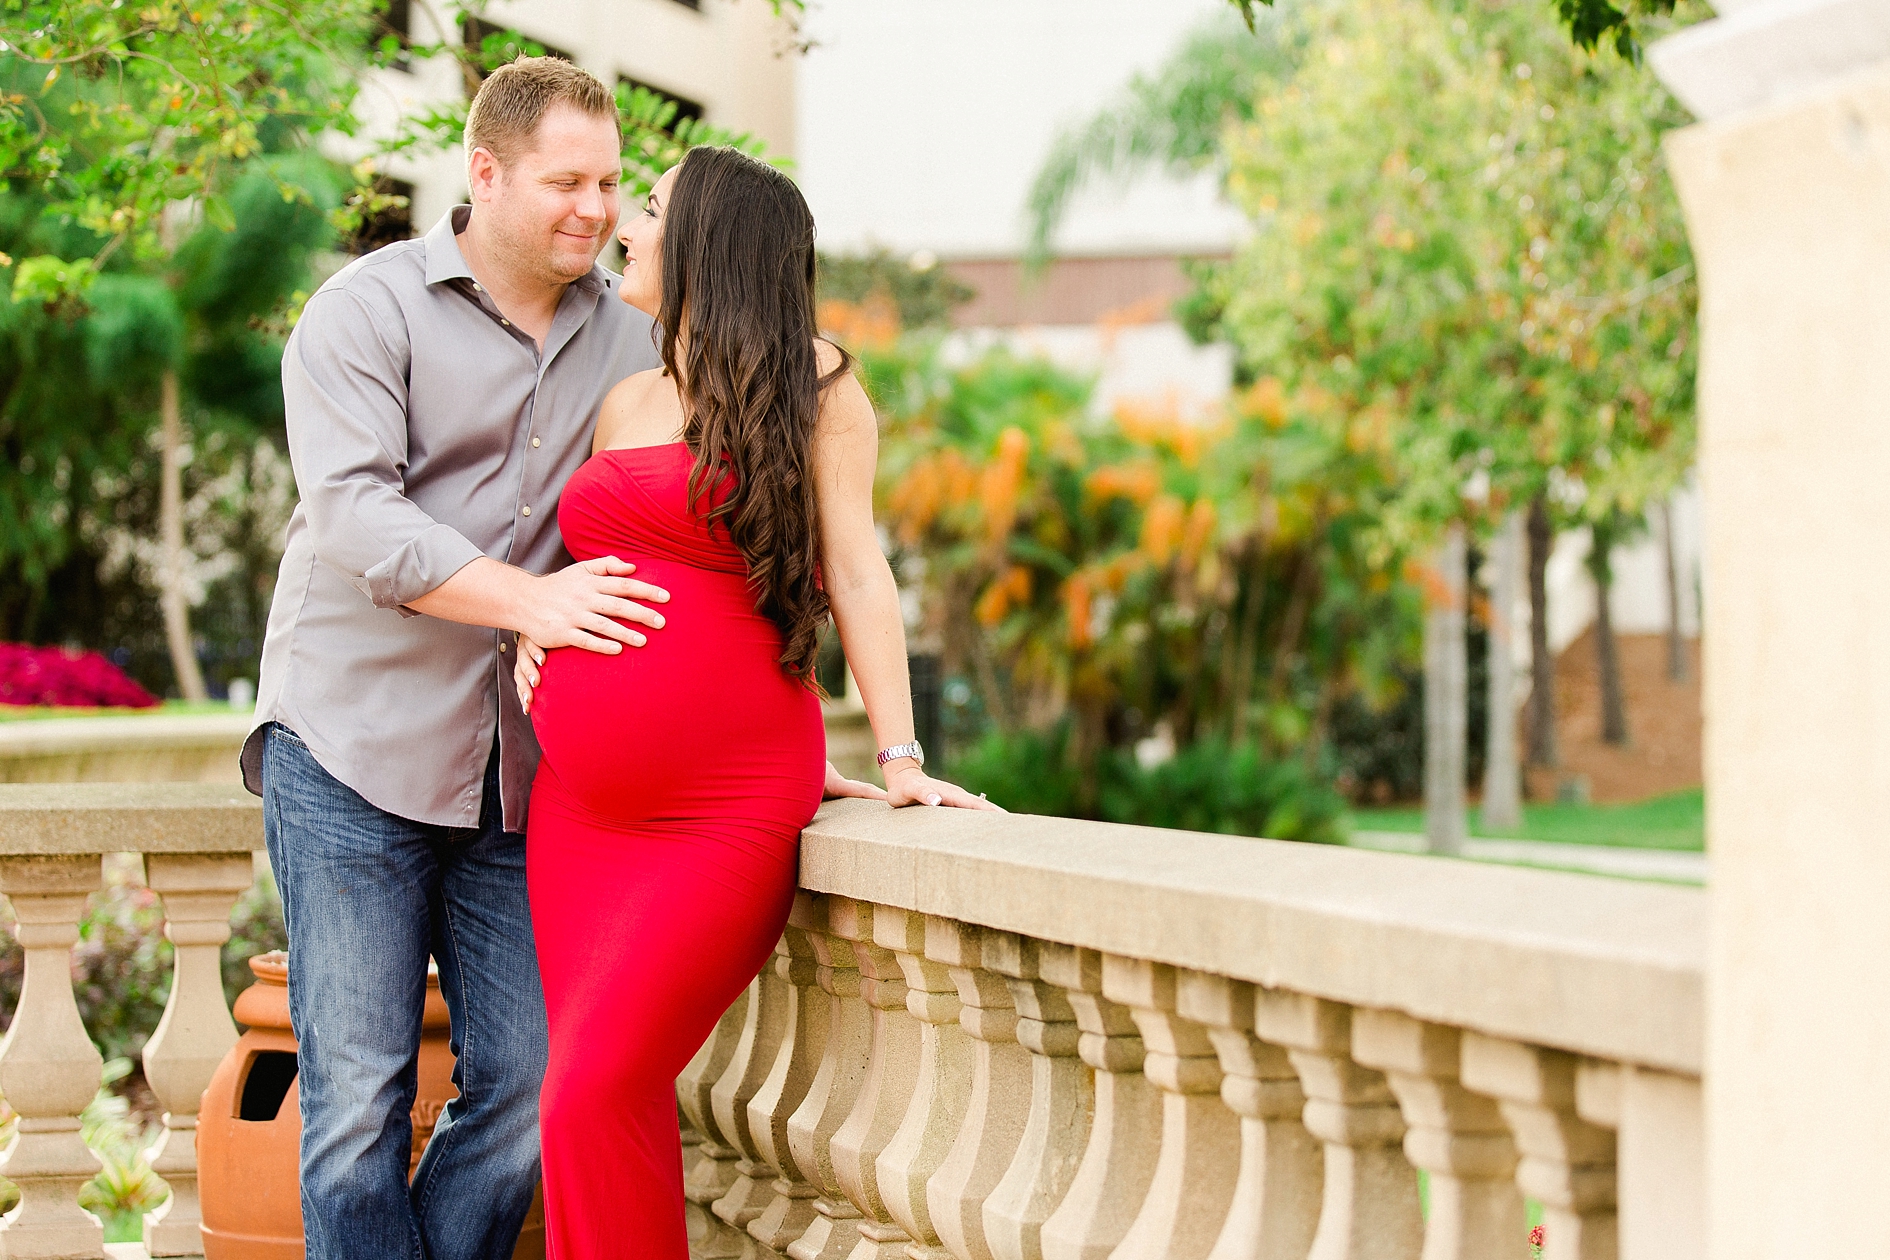 Tampa Maternity photographer | © Ailyn La Torre Photography 2015